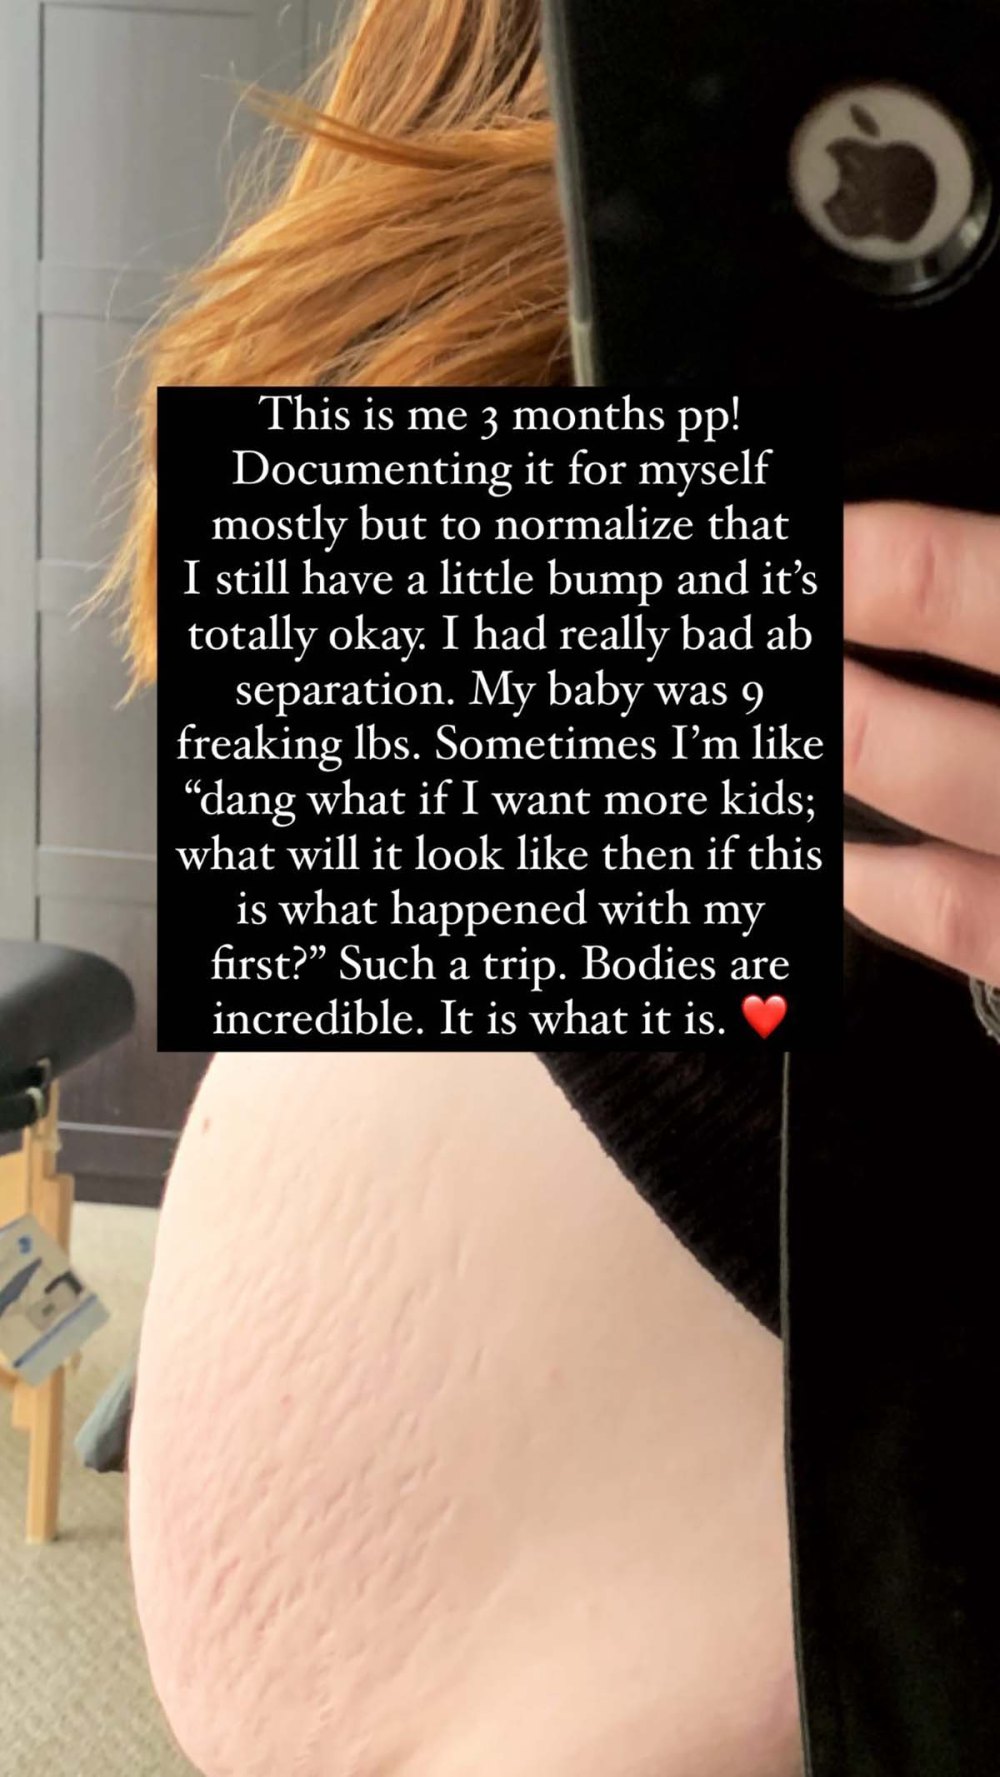 Jacob Roloffs Wife Isabel Rock Is Totally OK' With Her 'Little Bump 3 Months Postpartum Photo